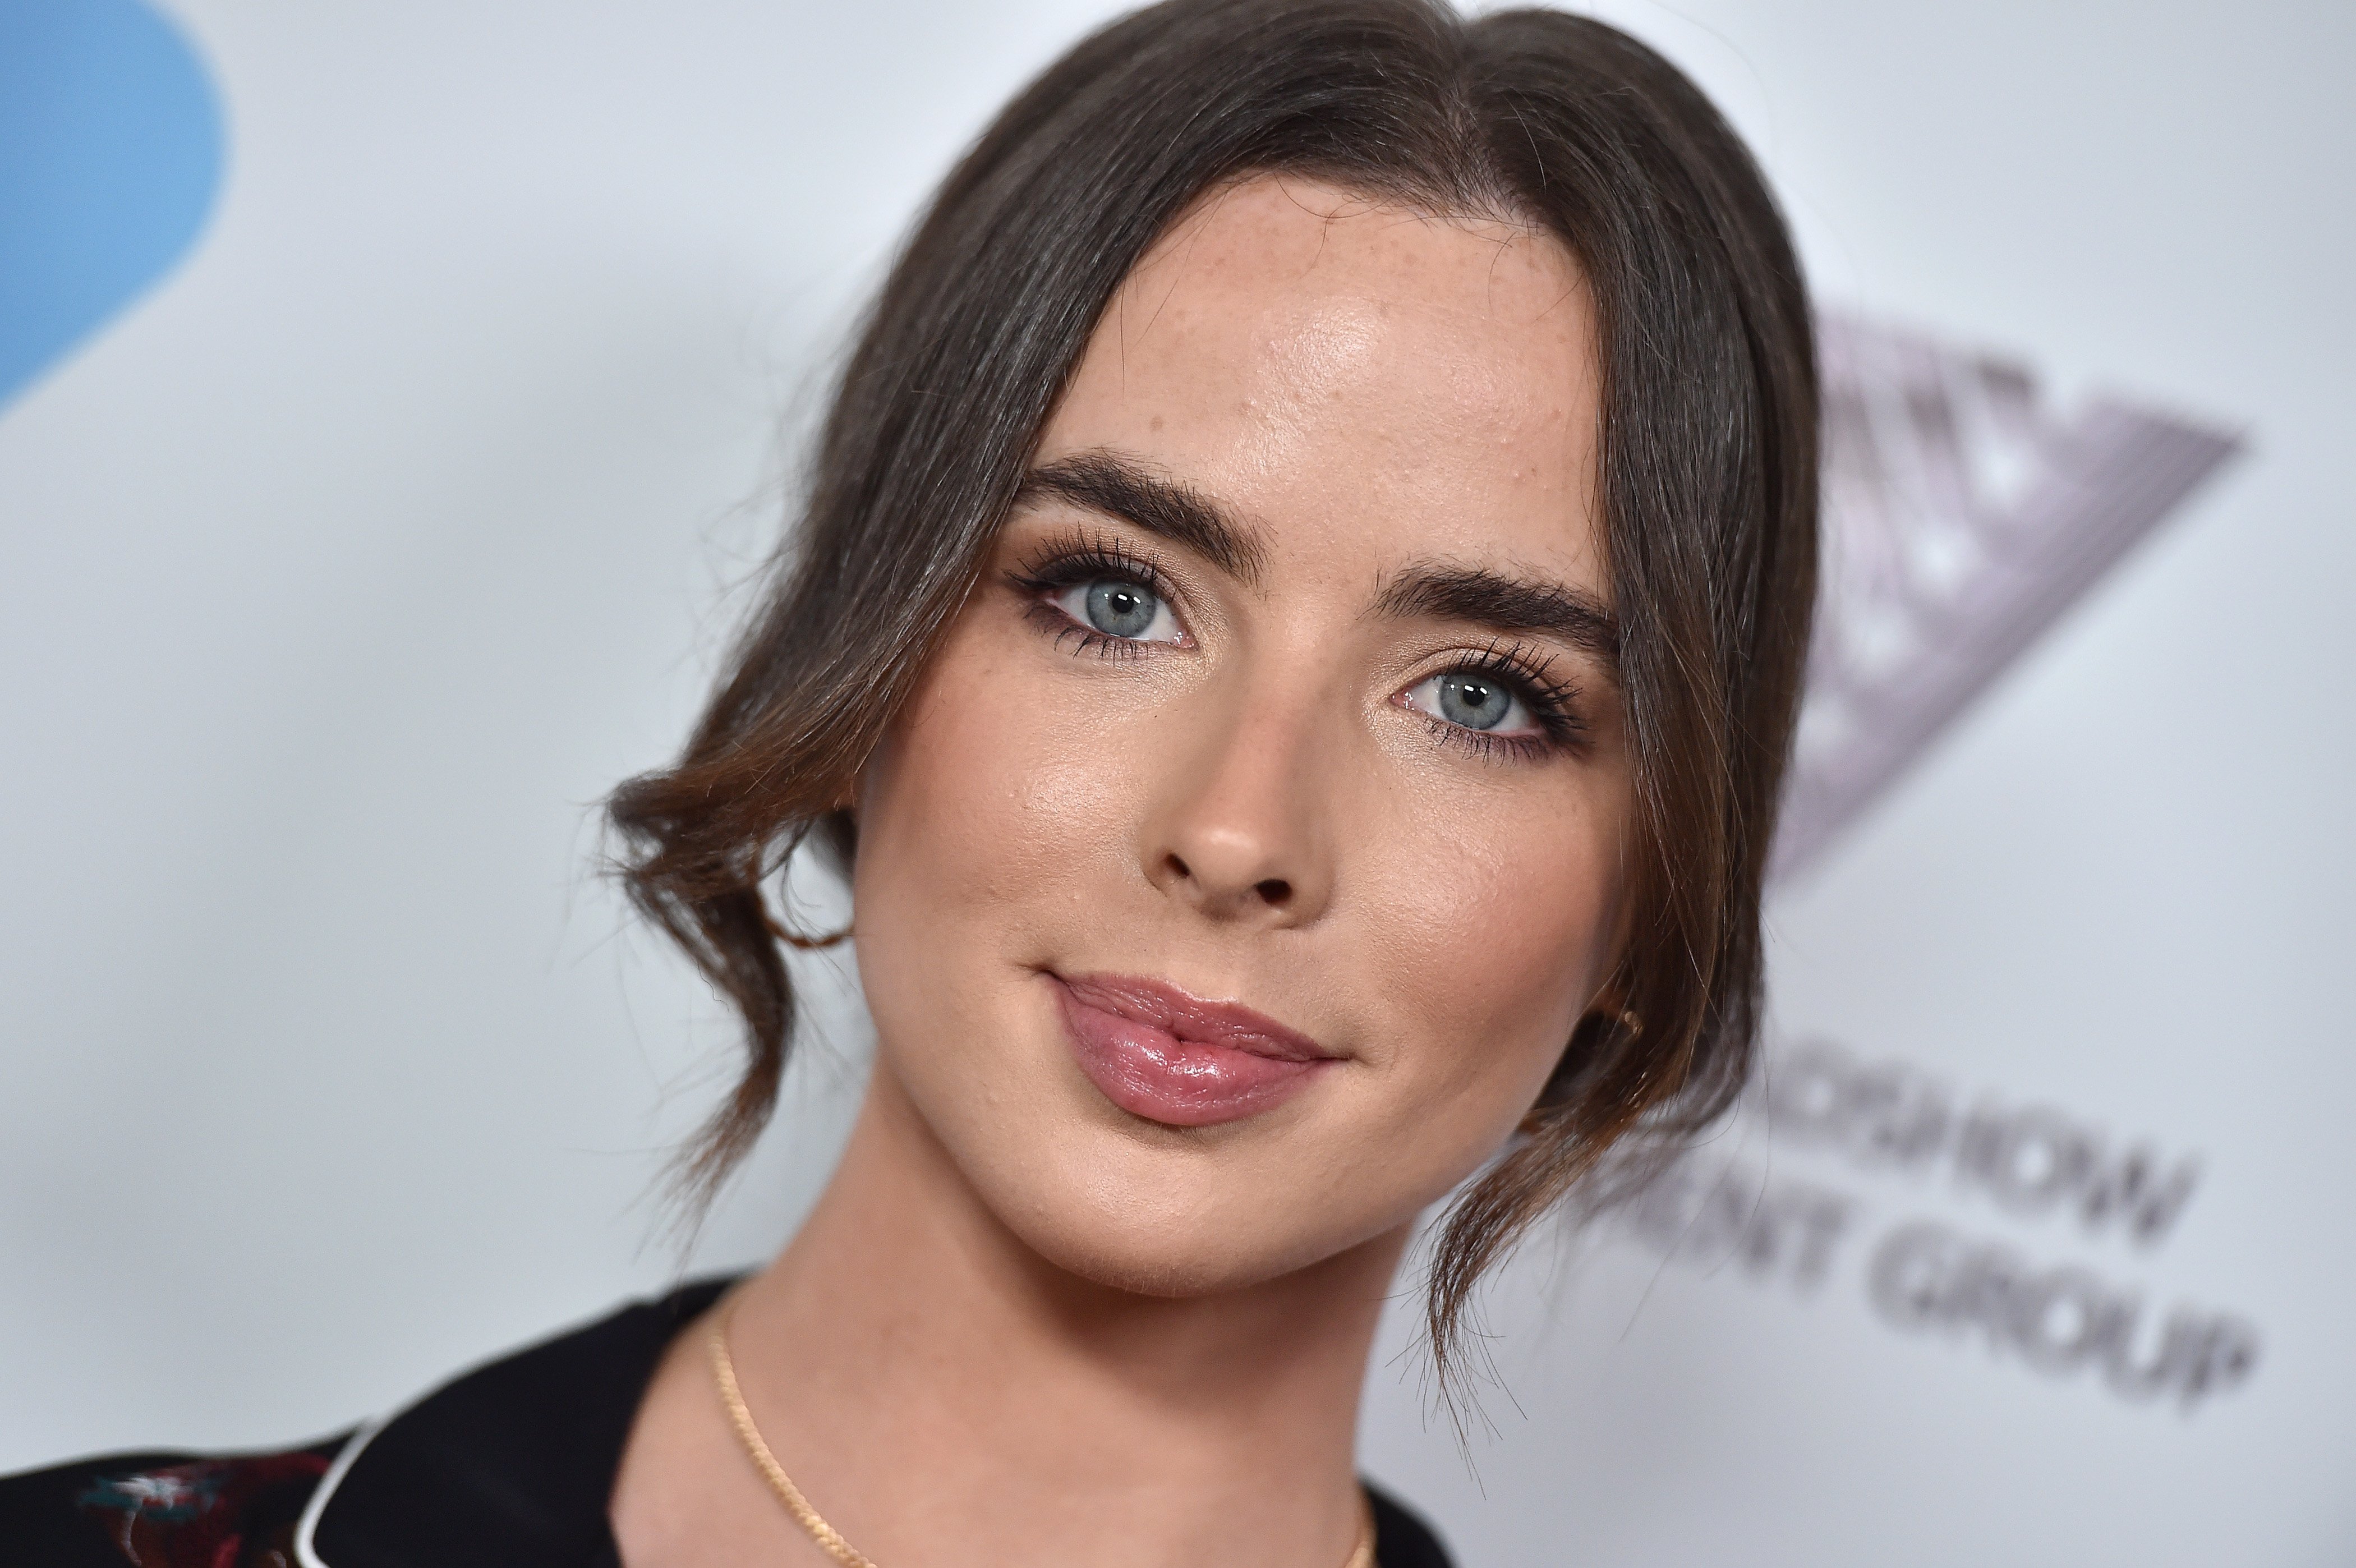 'The Bold and the Beautiful' star Ashleigh Brewer is best known for playing Ivy Forrester on the CBS soap opera.